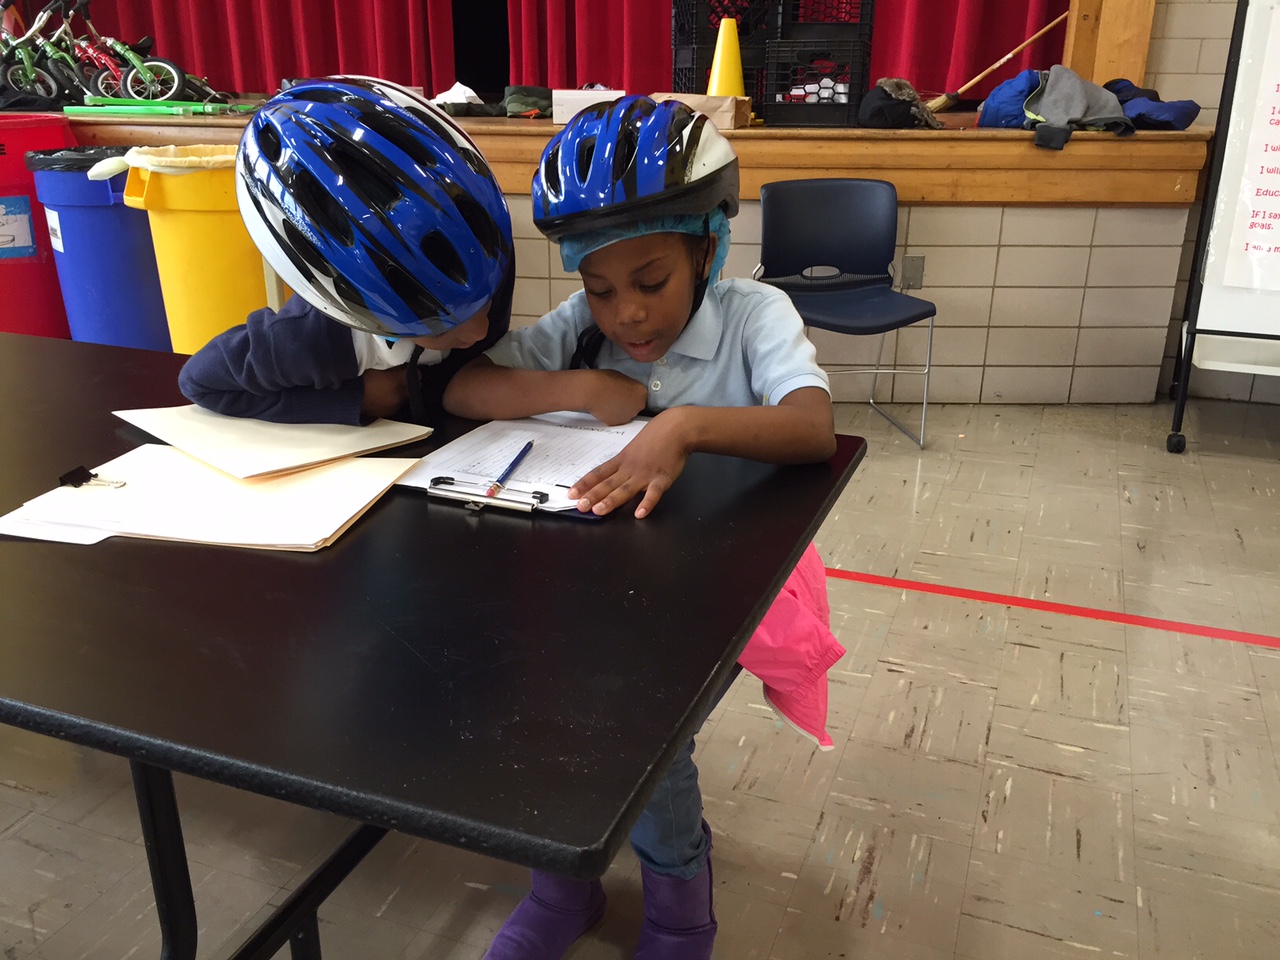 Two CW Harris Elementary School students check out some paperwork before the big event. (WTOP/Kate Ryan)